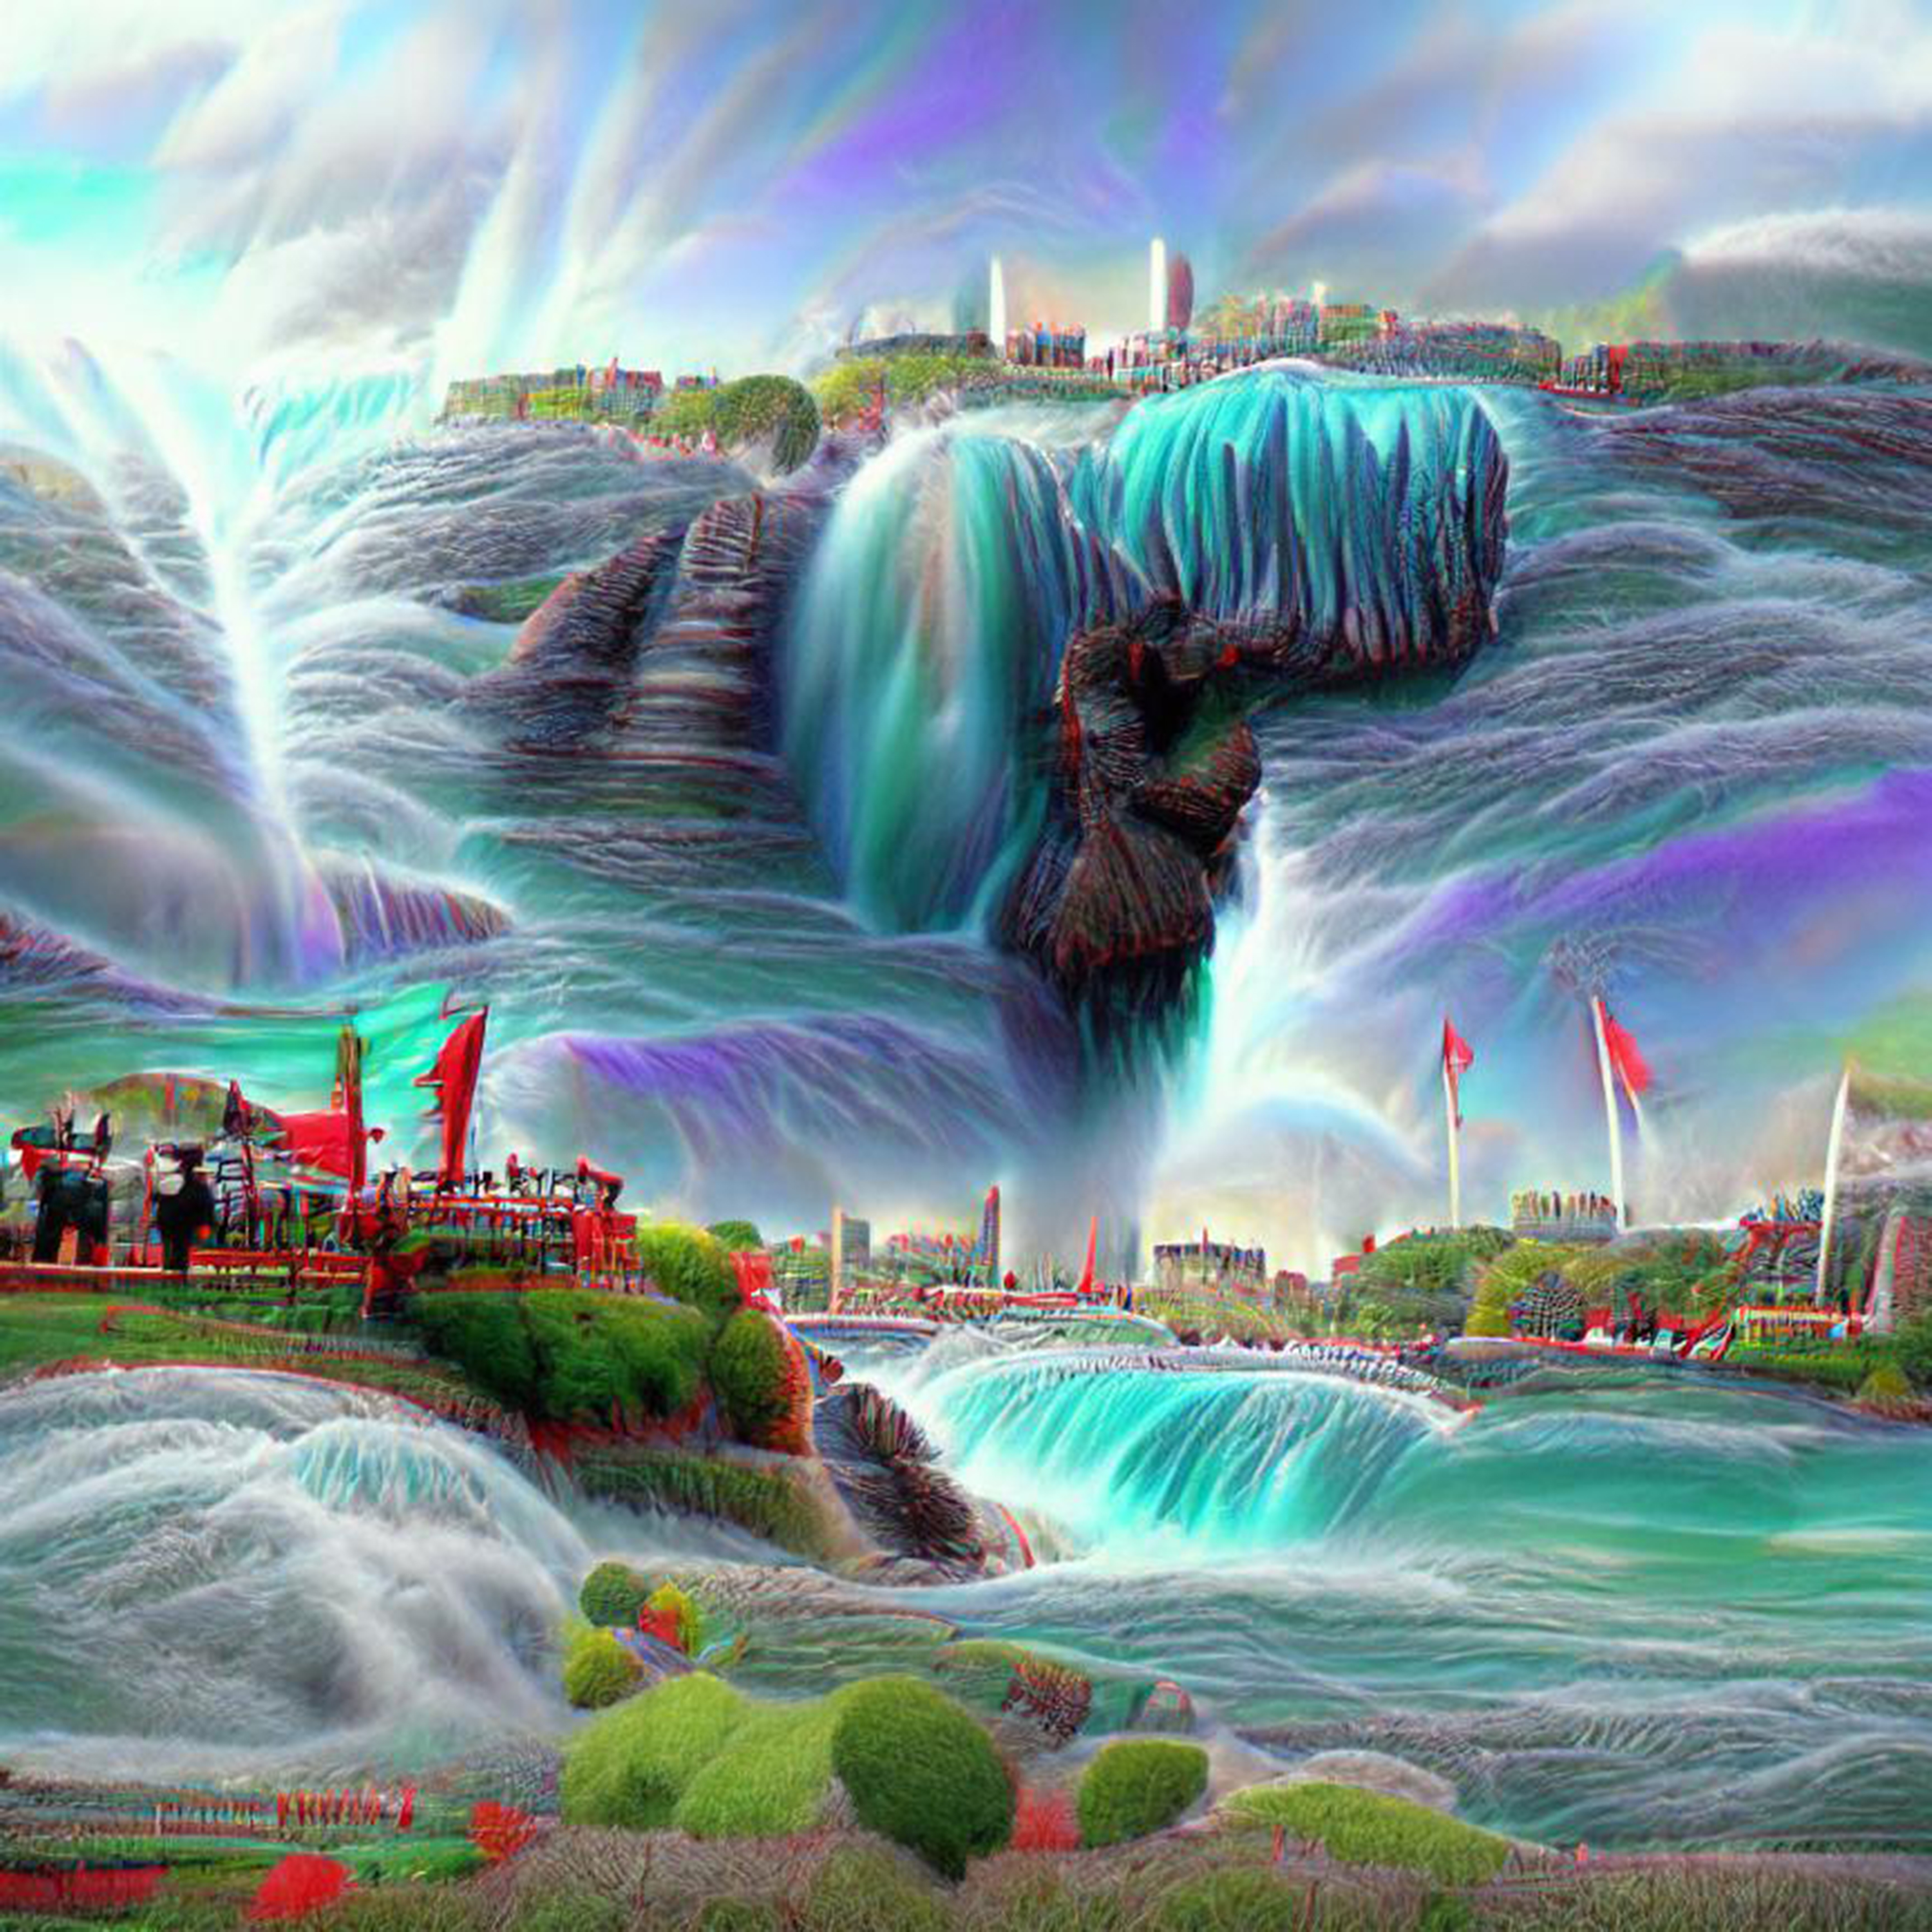 The Great Falls